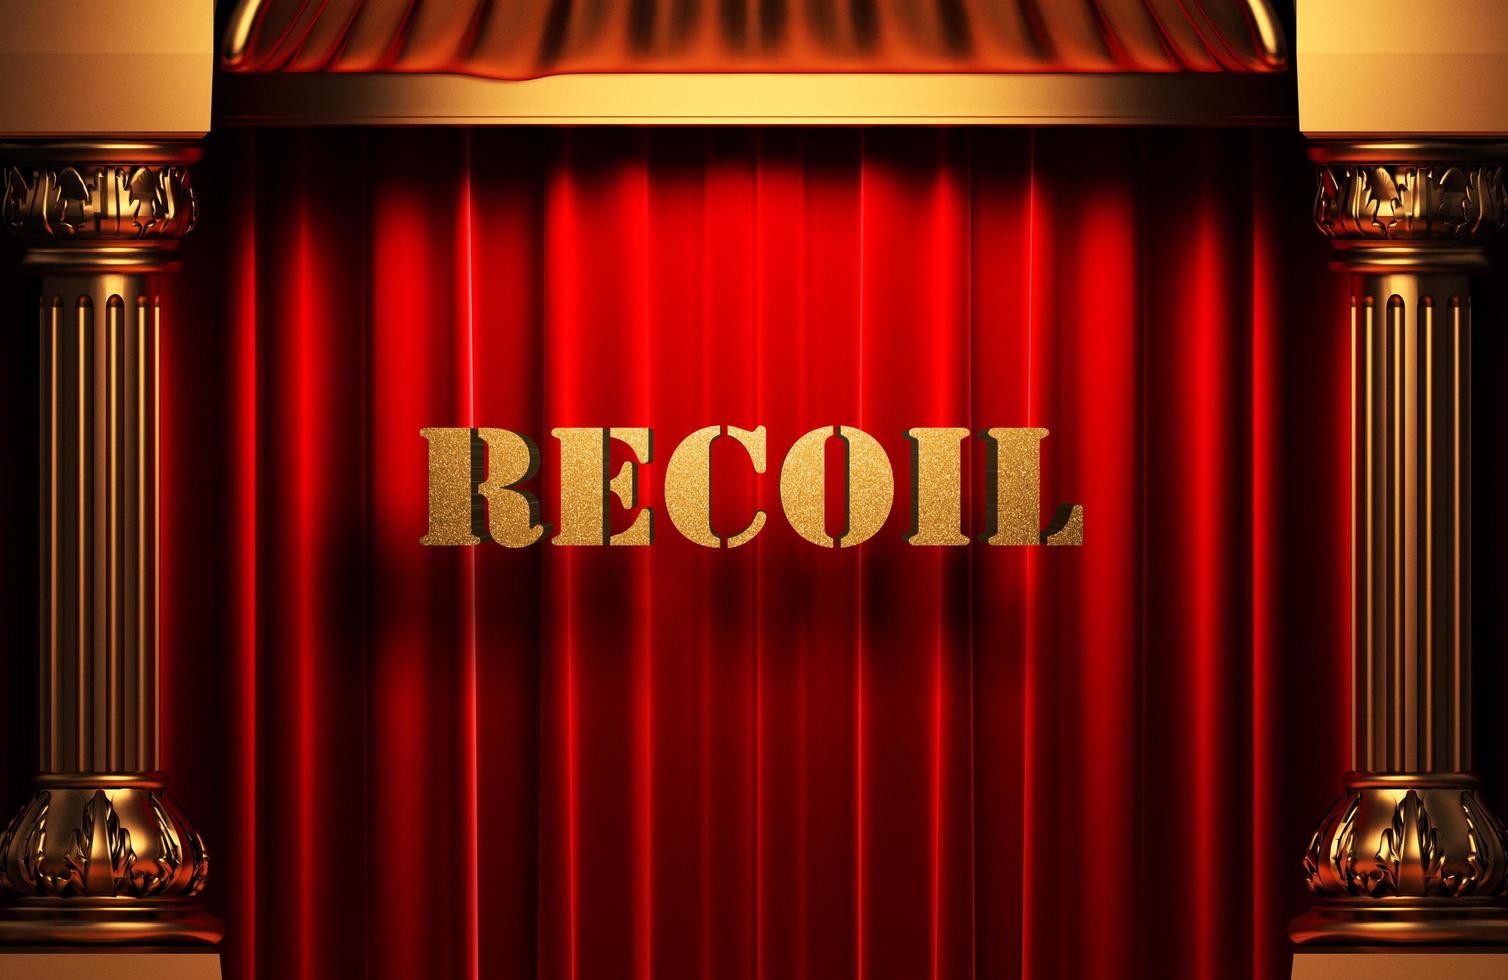 recoil golden word on red curtain photo